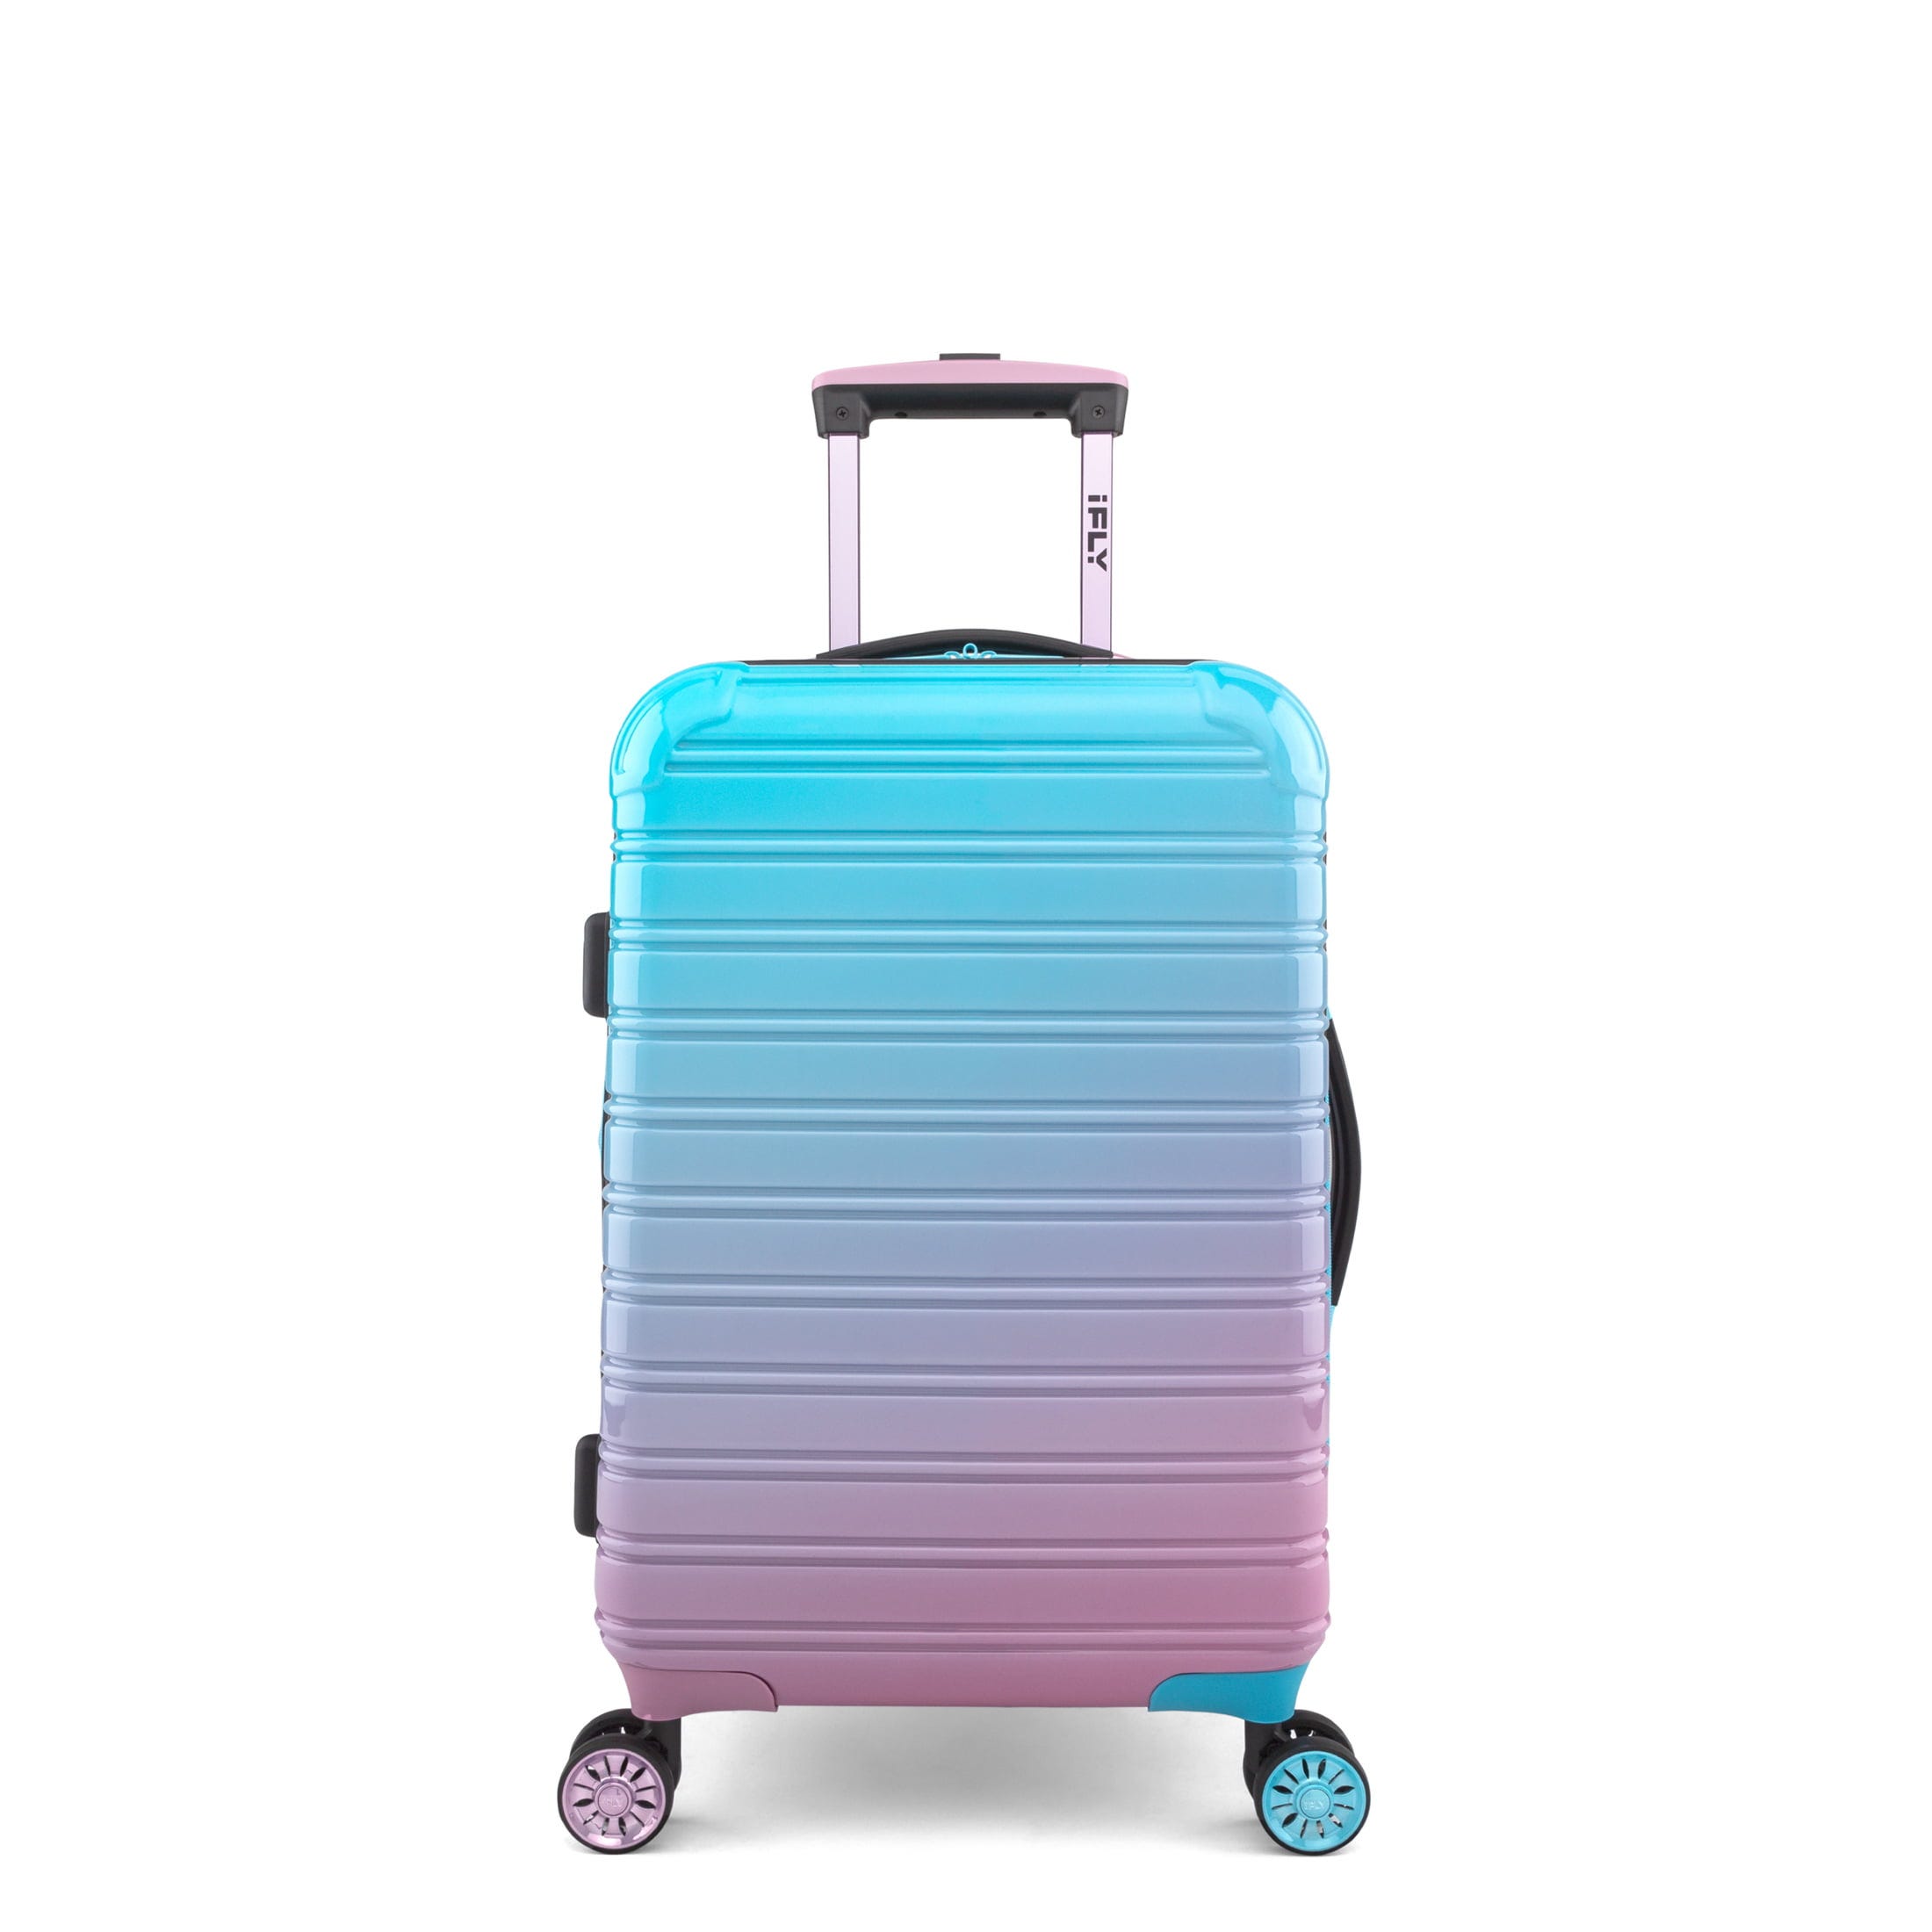 Cheap Carry on Luggage Spinner Women Men Business Trolley Suitcase Set  Hardside Travel Case  China Luggage Bags and Luggage Travel Bags price   MadeinChinacom